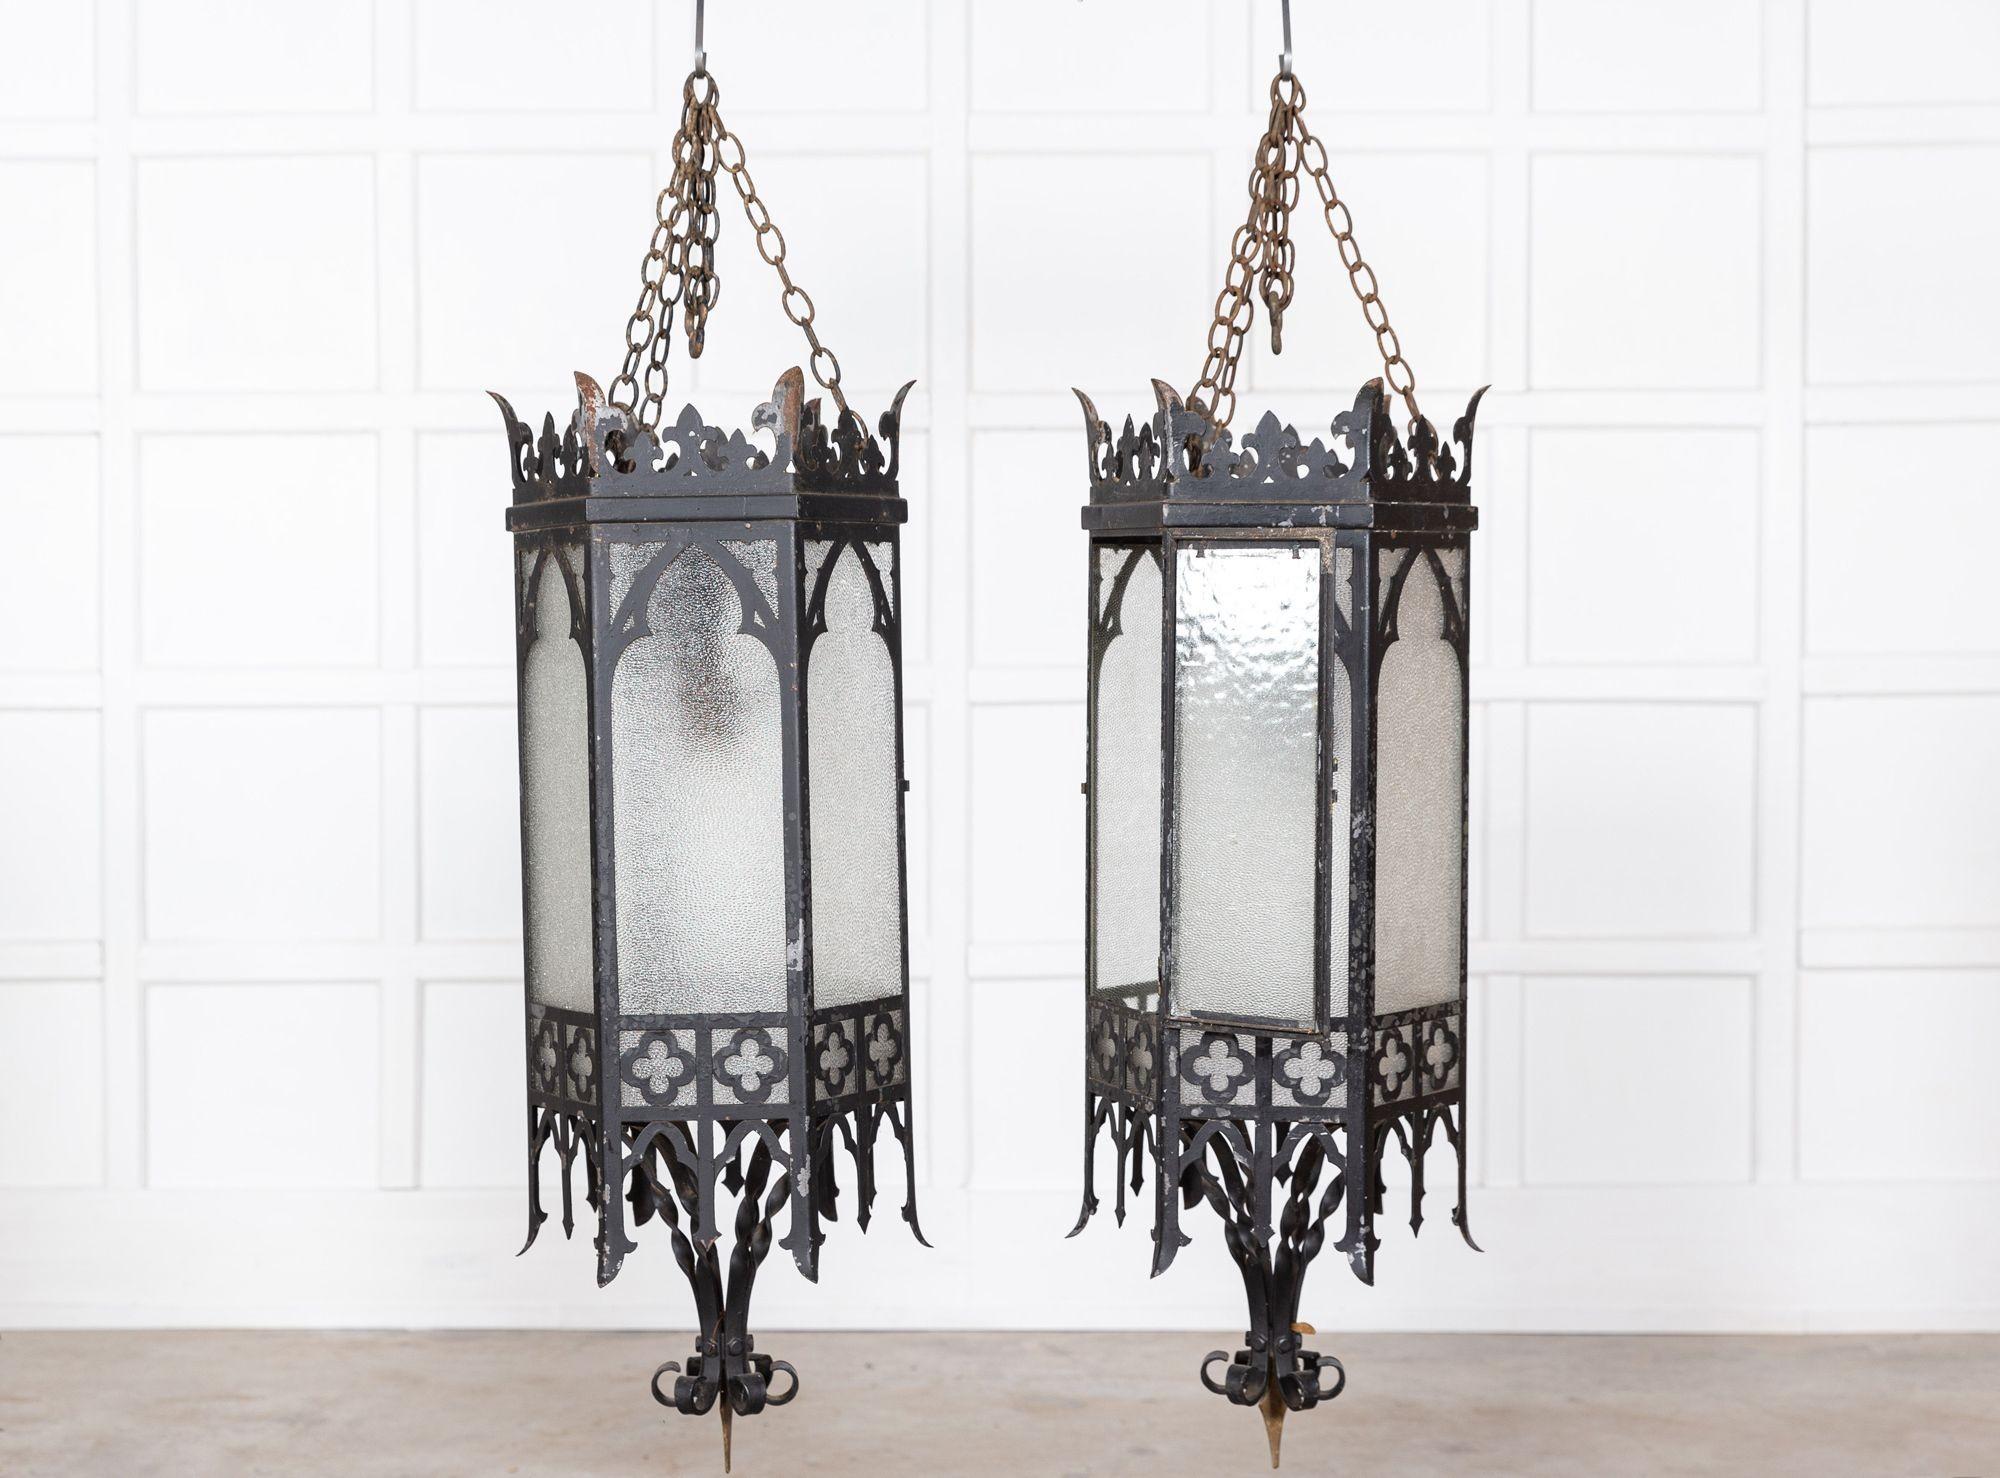 circa 1900
Monumental Pair Gothic Revival Church Lanterns
Provenance: Church Manchester England
New wiring and original hanging chains.
Price is for the pair
sku 1371
W31 x D31 x H98 cm